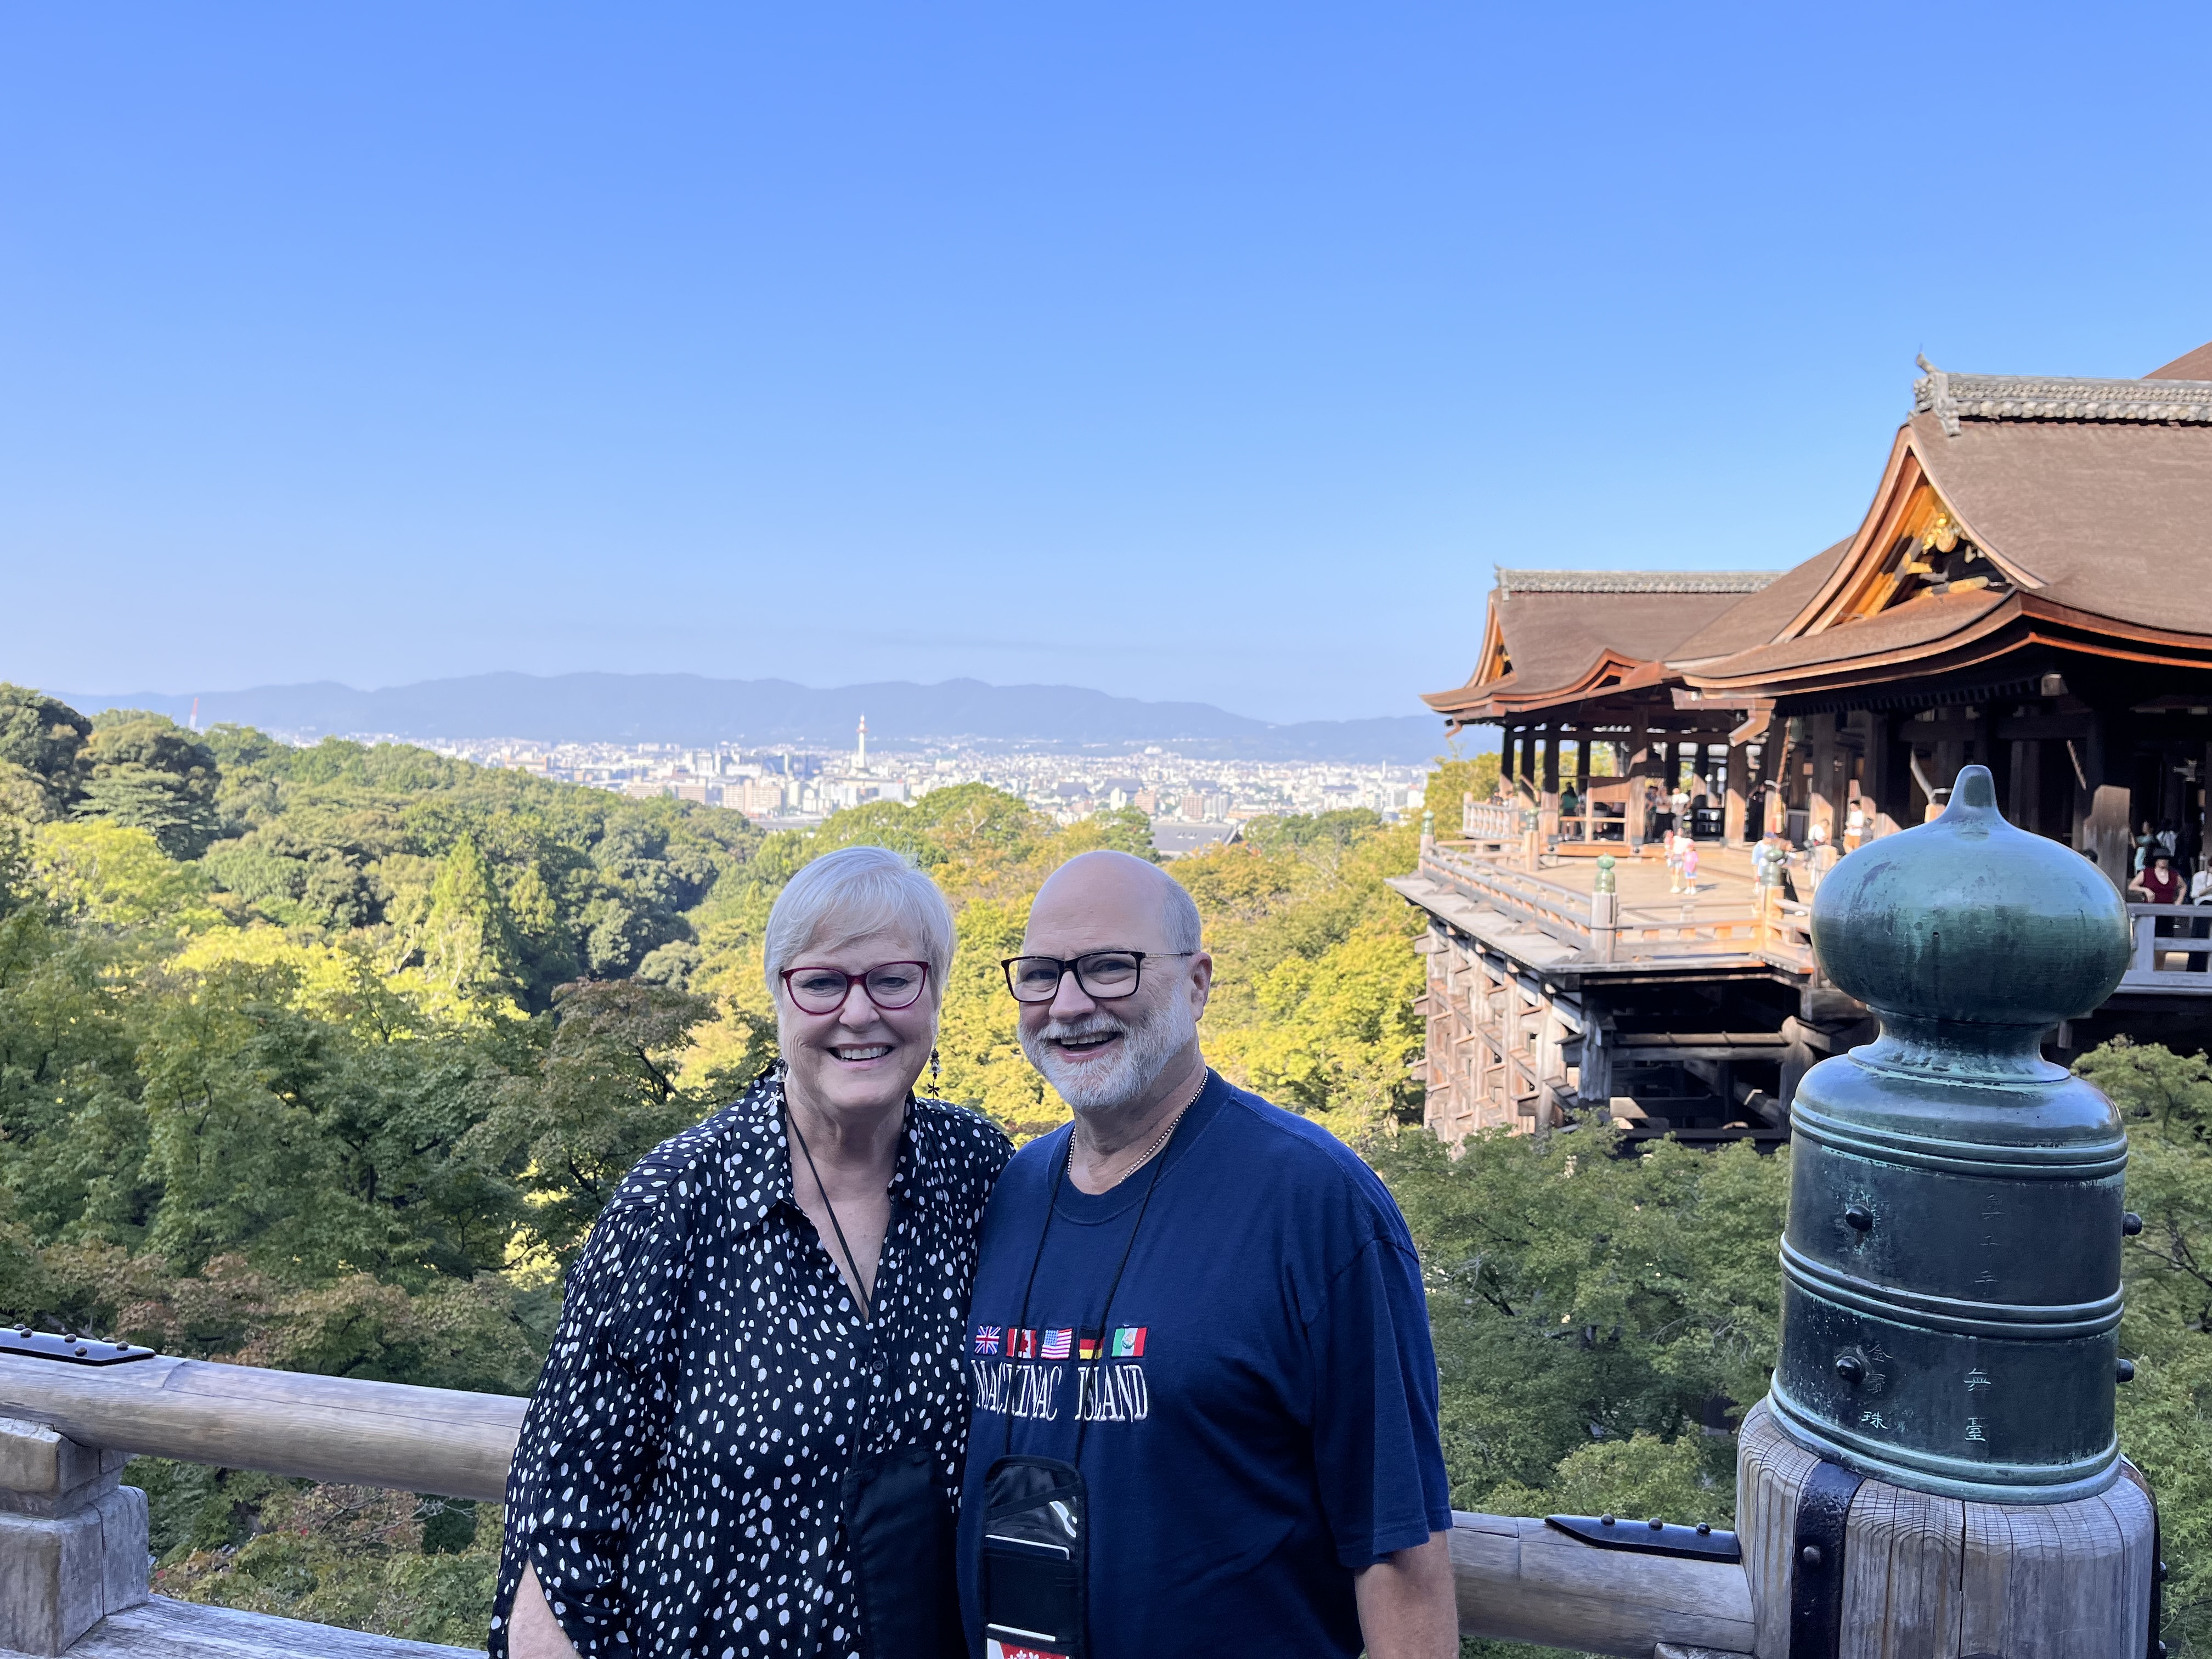 Retirees traveling the world.